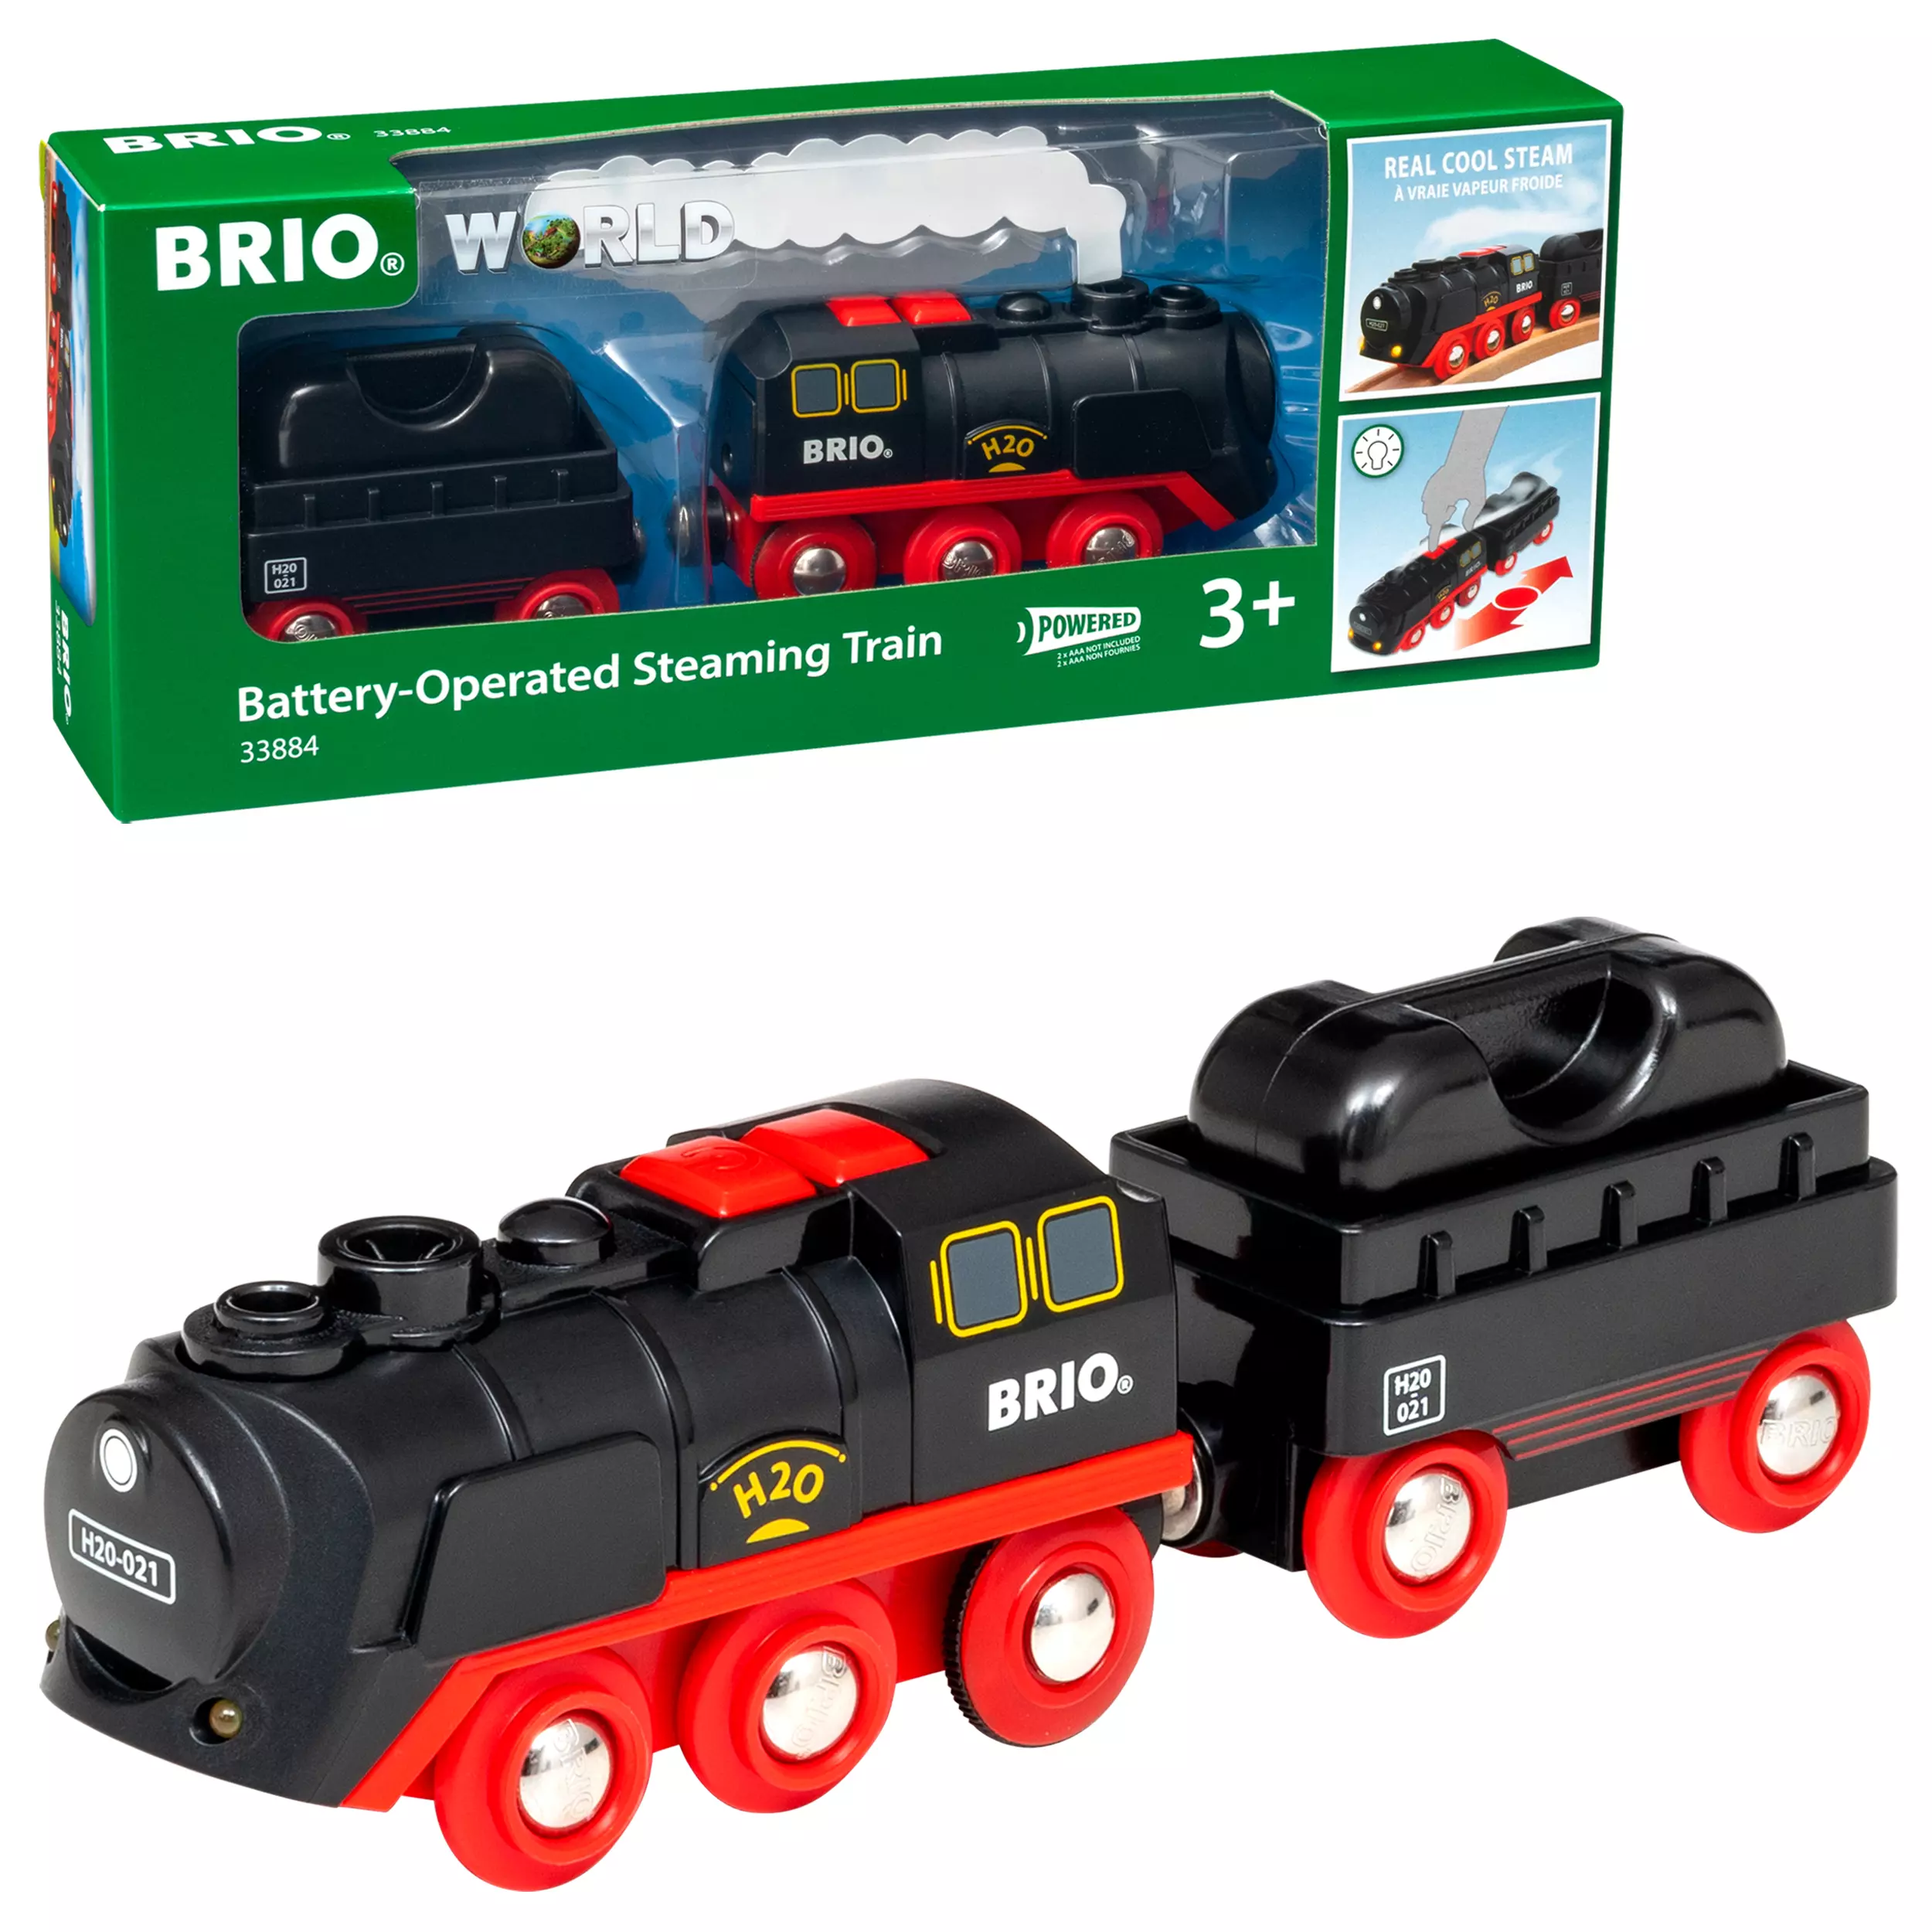 Brio Battery-Operated Steaming Train 33884